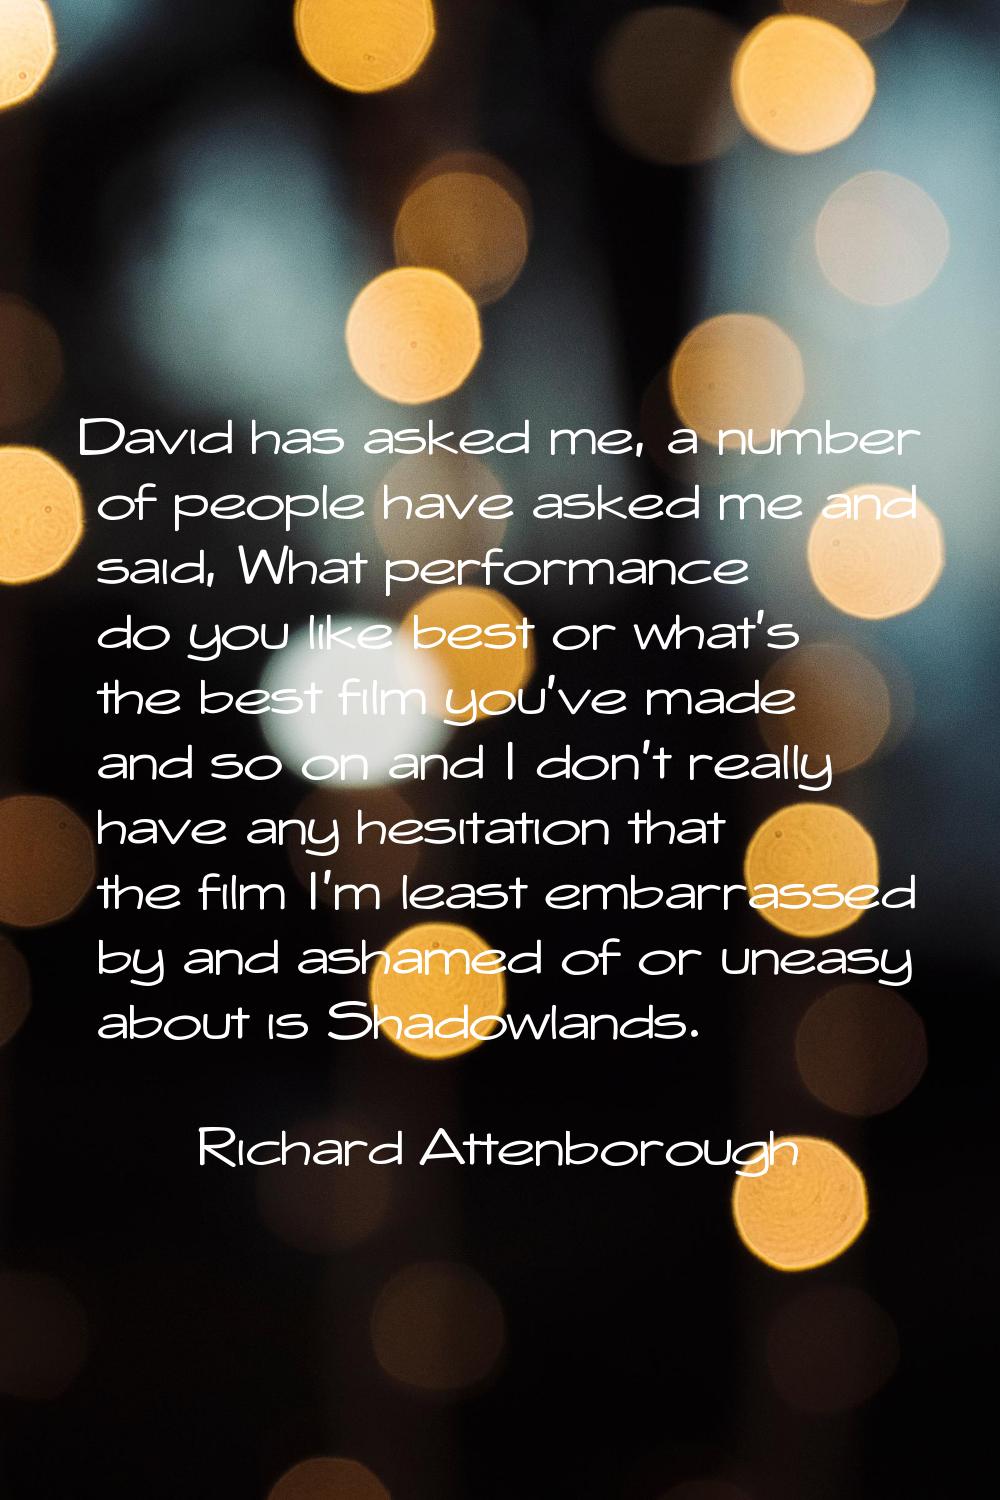 David has asked me, a number of people have asked me and said, What performance do you like best or